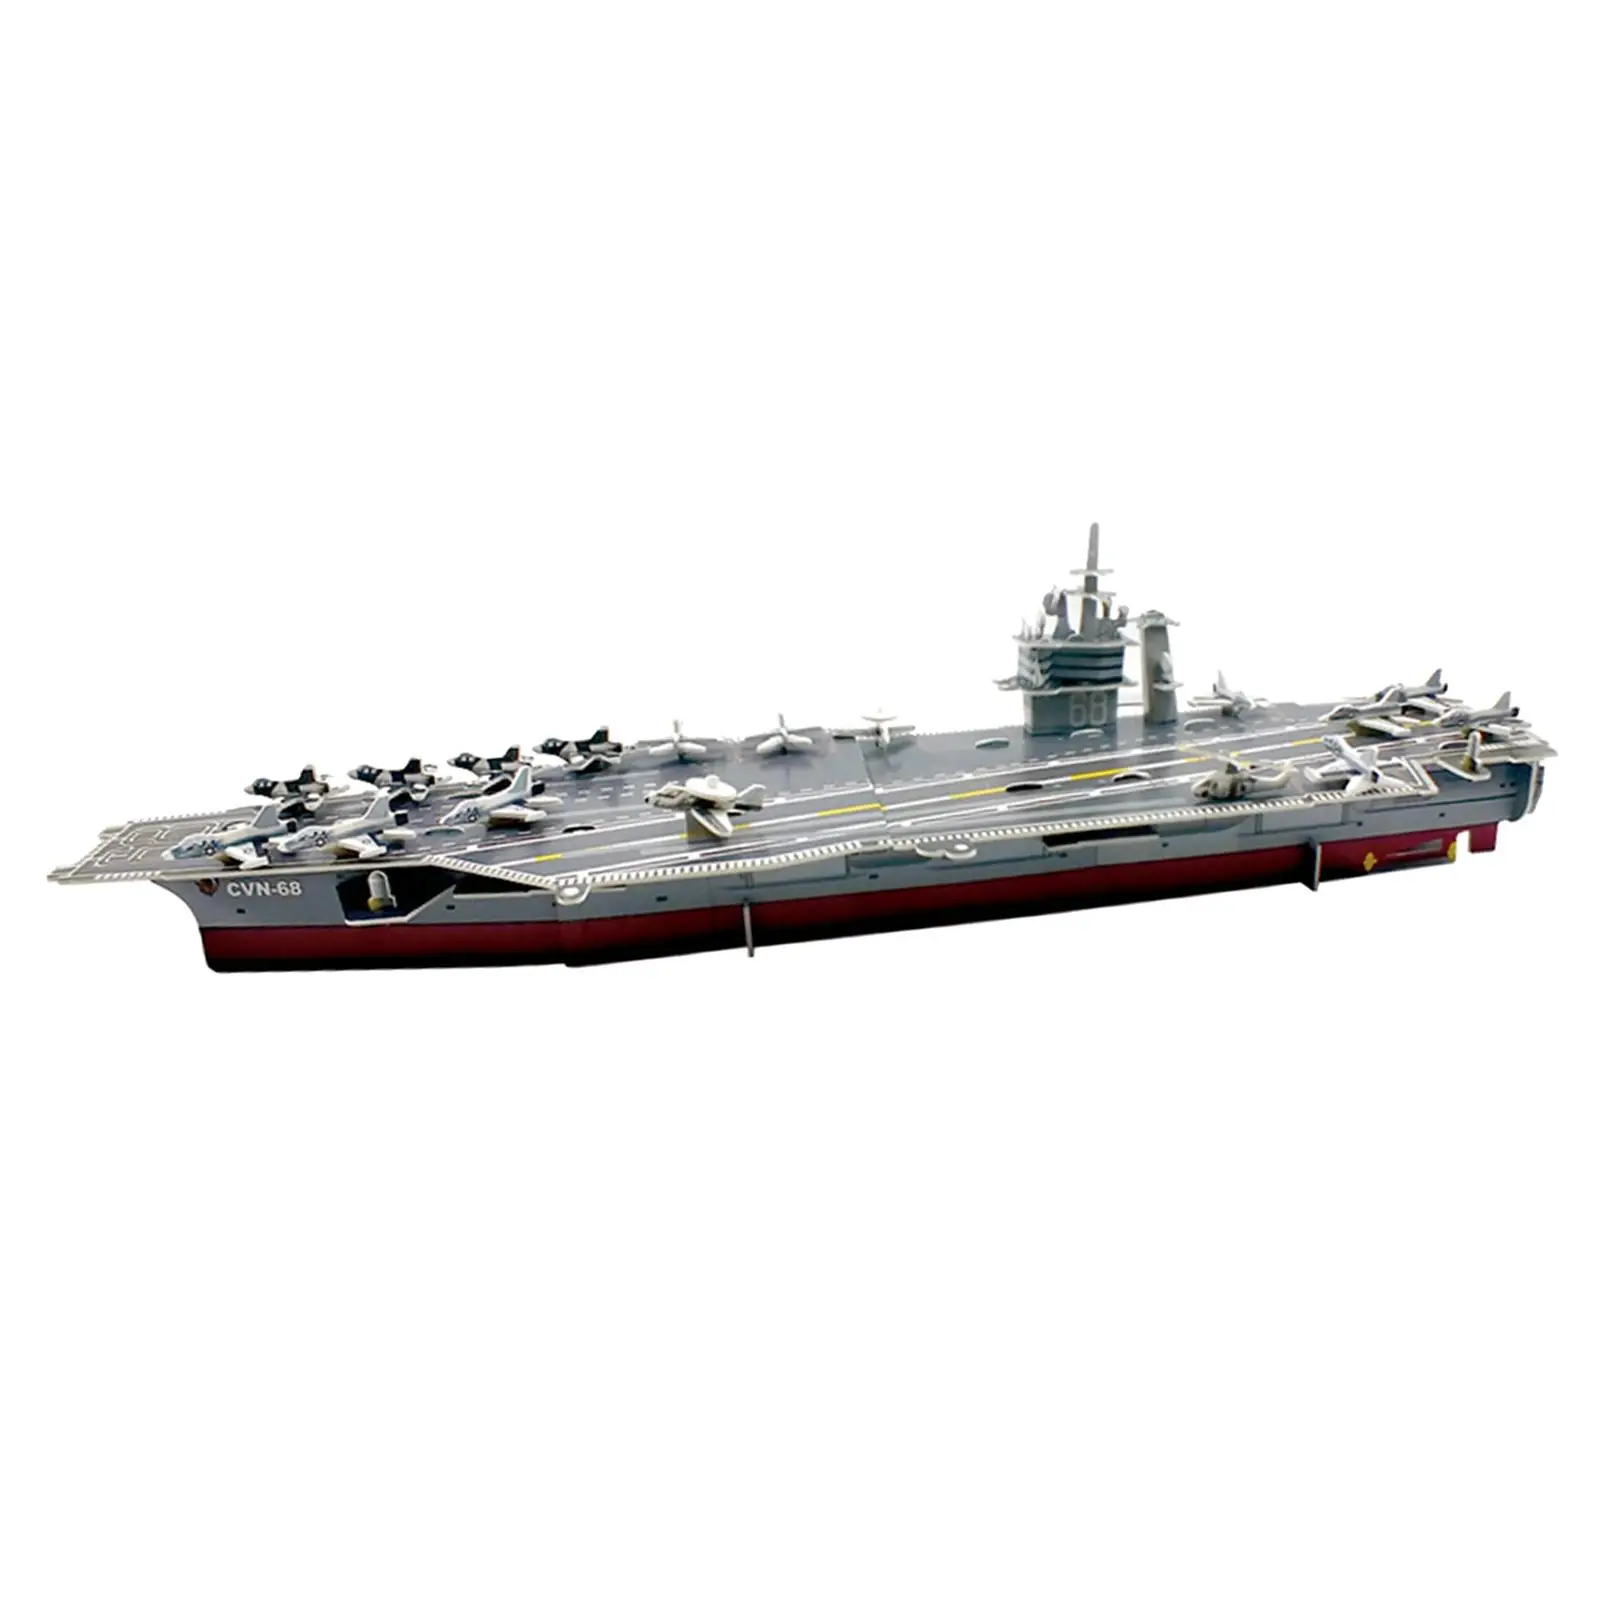 Ship Boat Model Kits 3D Model Kit Early Educational Toy Ship Model Kits for Bedroom Study Collections Decoration